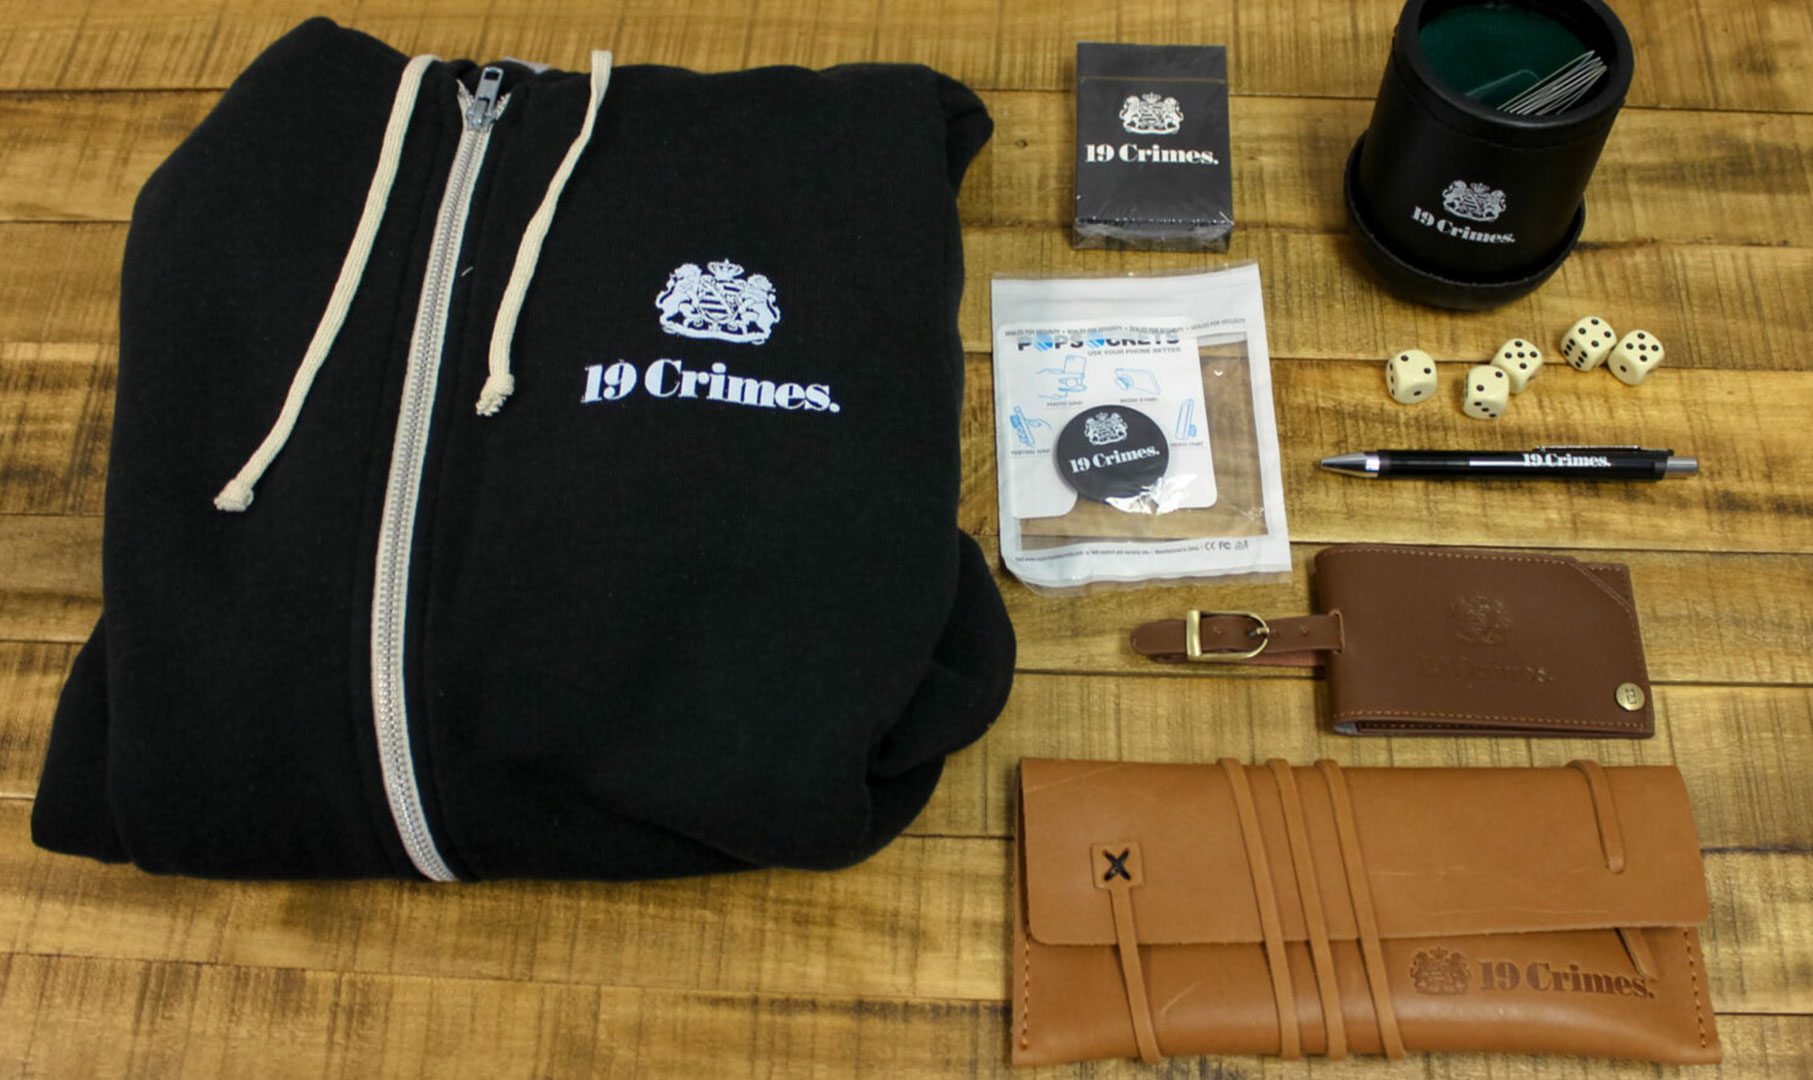 Image of sweatshirt, leather pouch and popsocket with 19 Crimes logo on it.